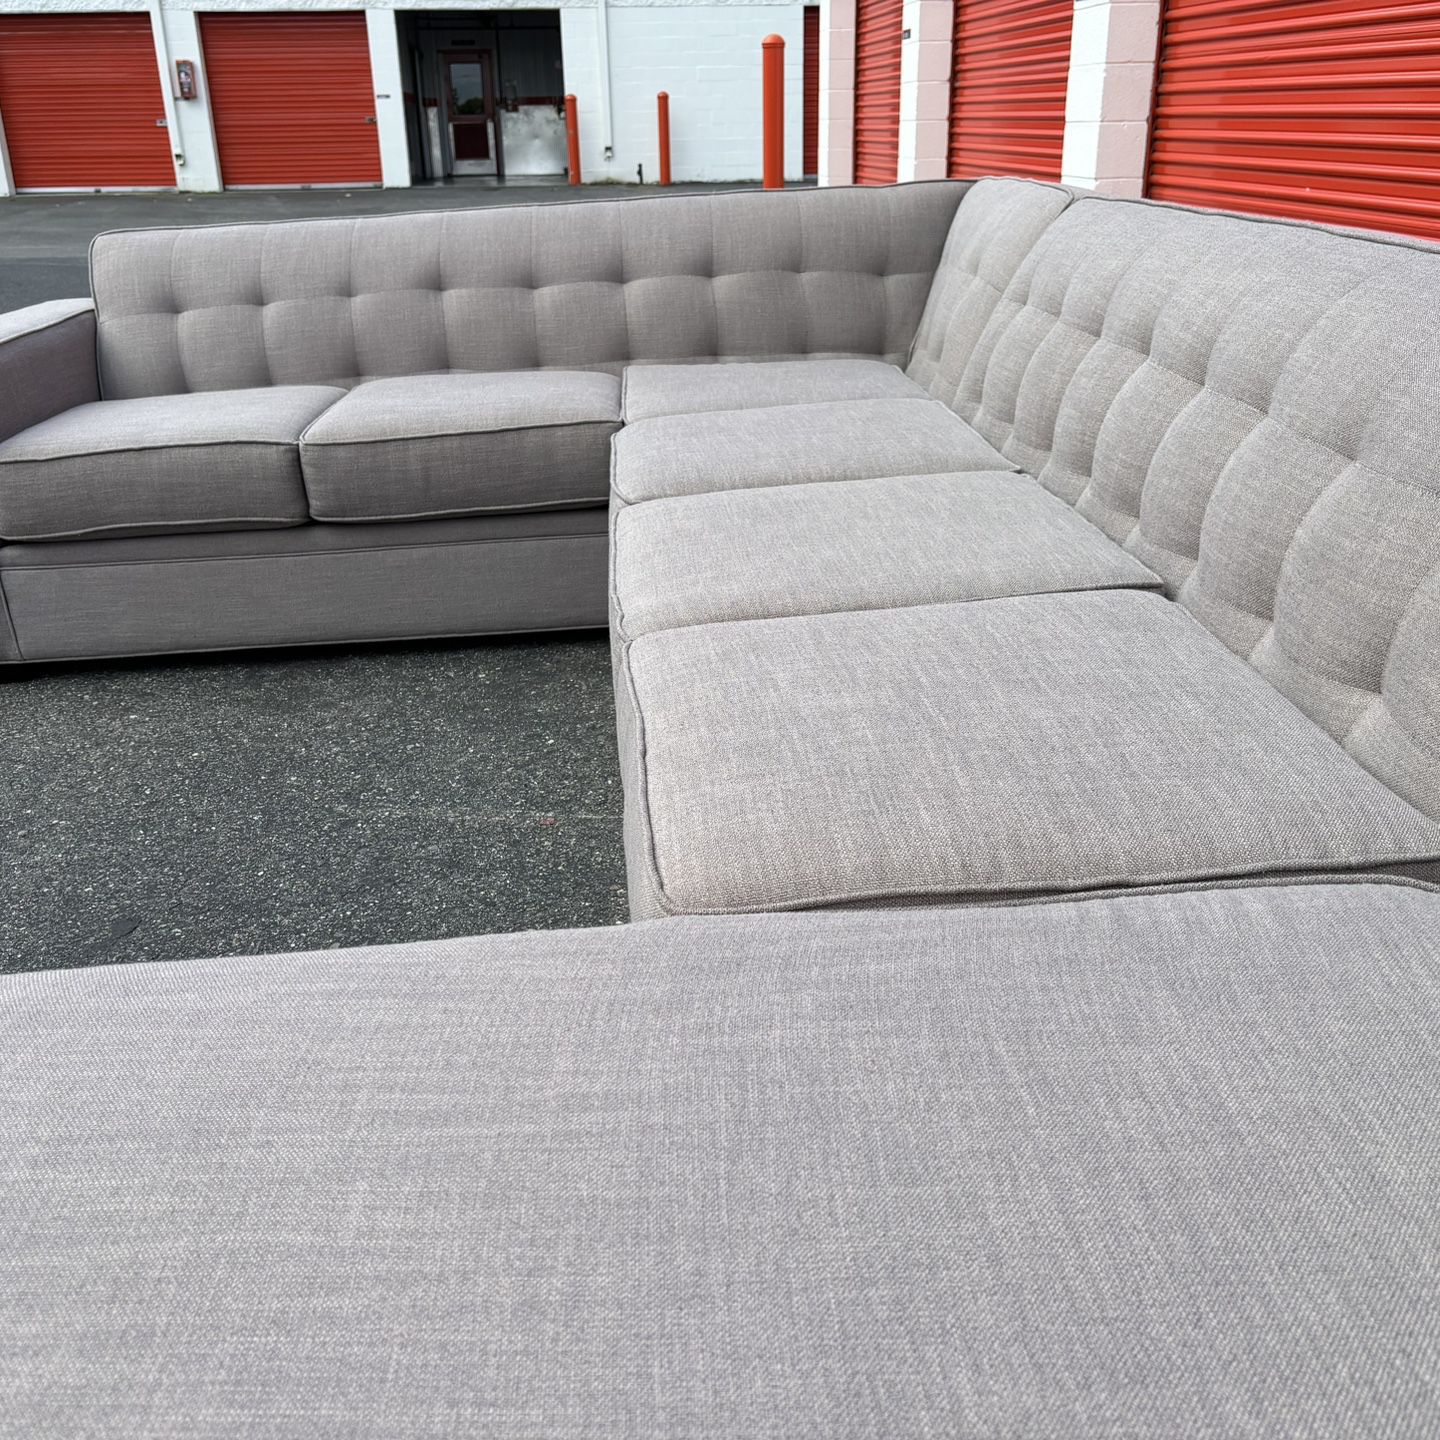 🔥 GRAY SECTIONAL